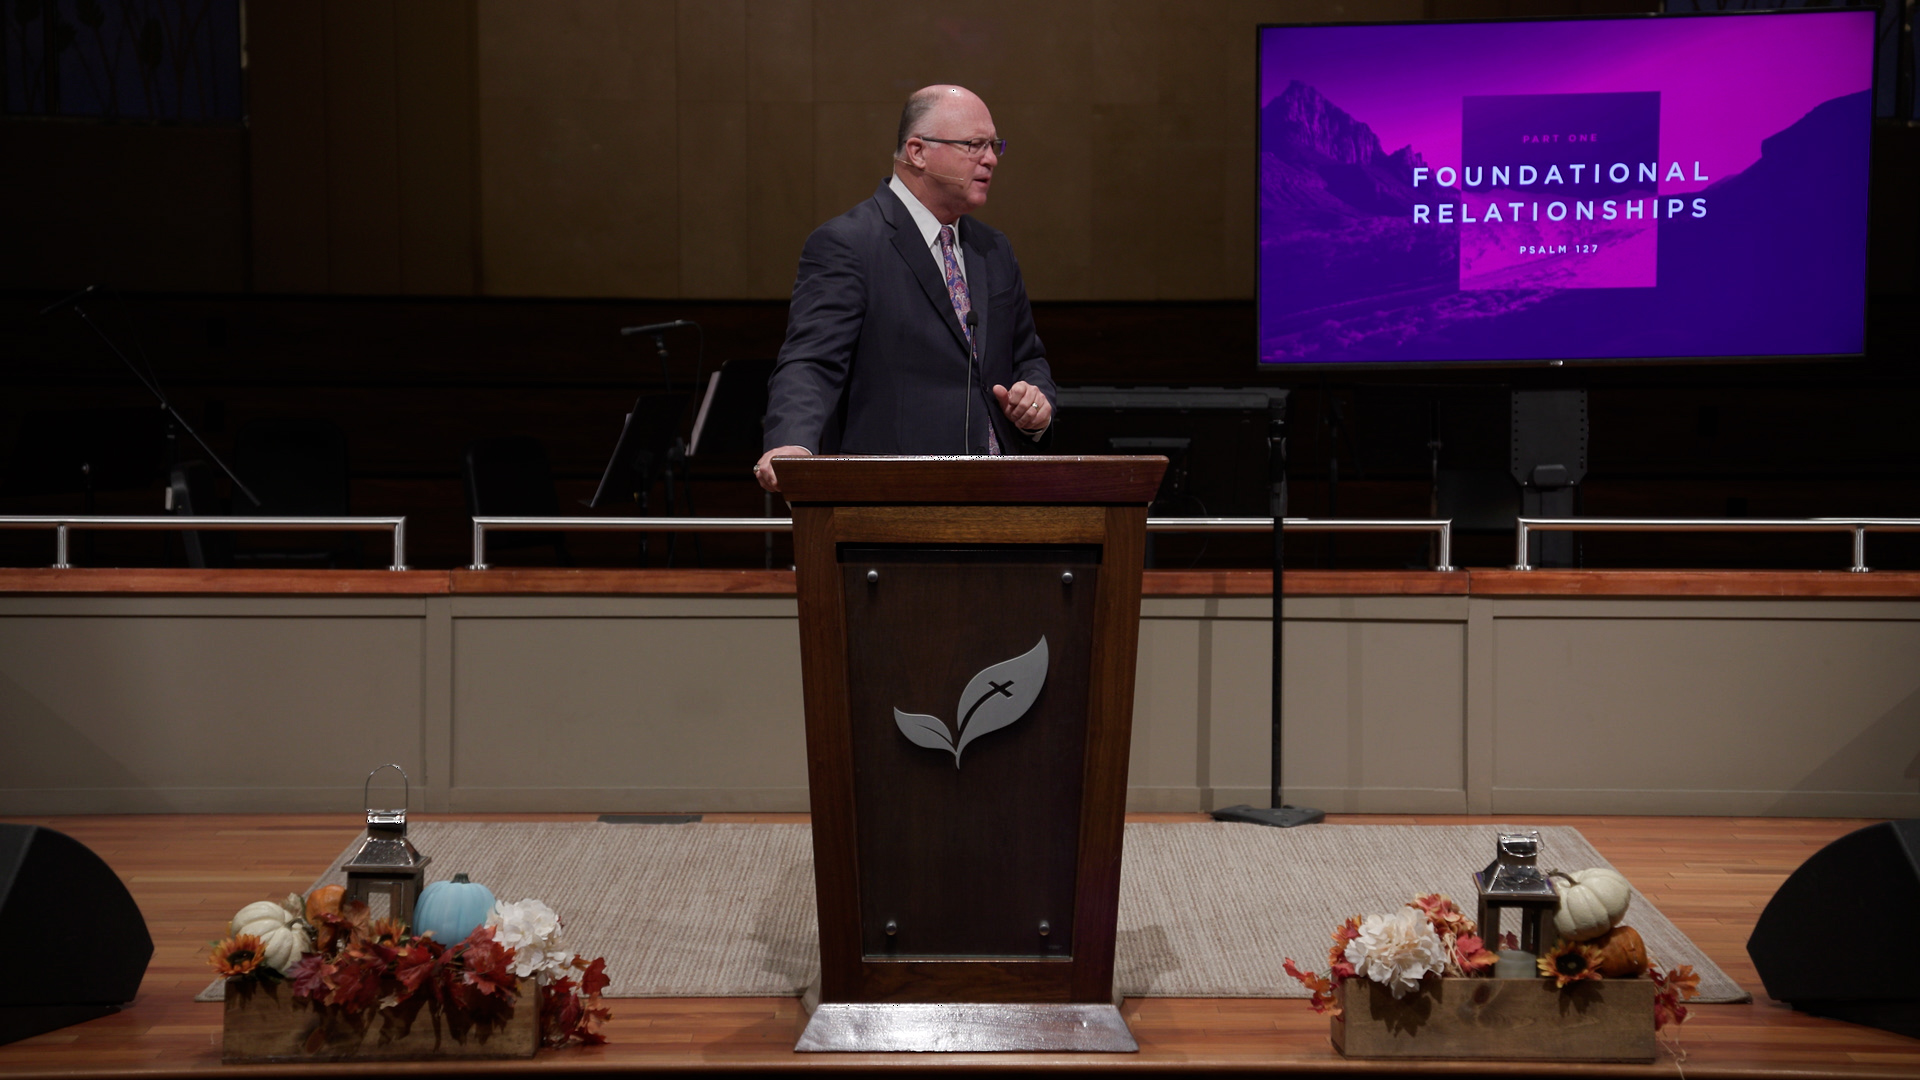 Pastor Paul Chappell: Foundational Relationships Part One